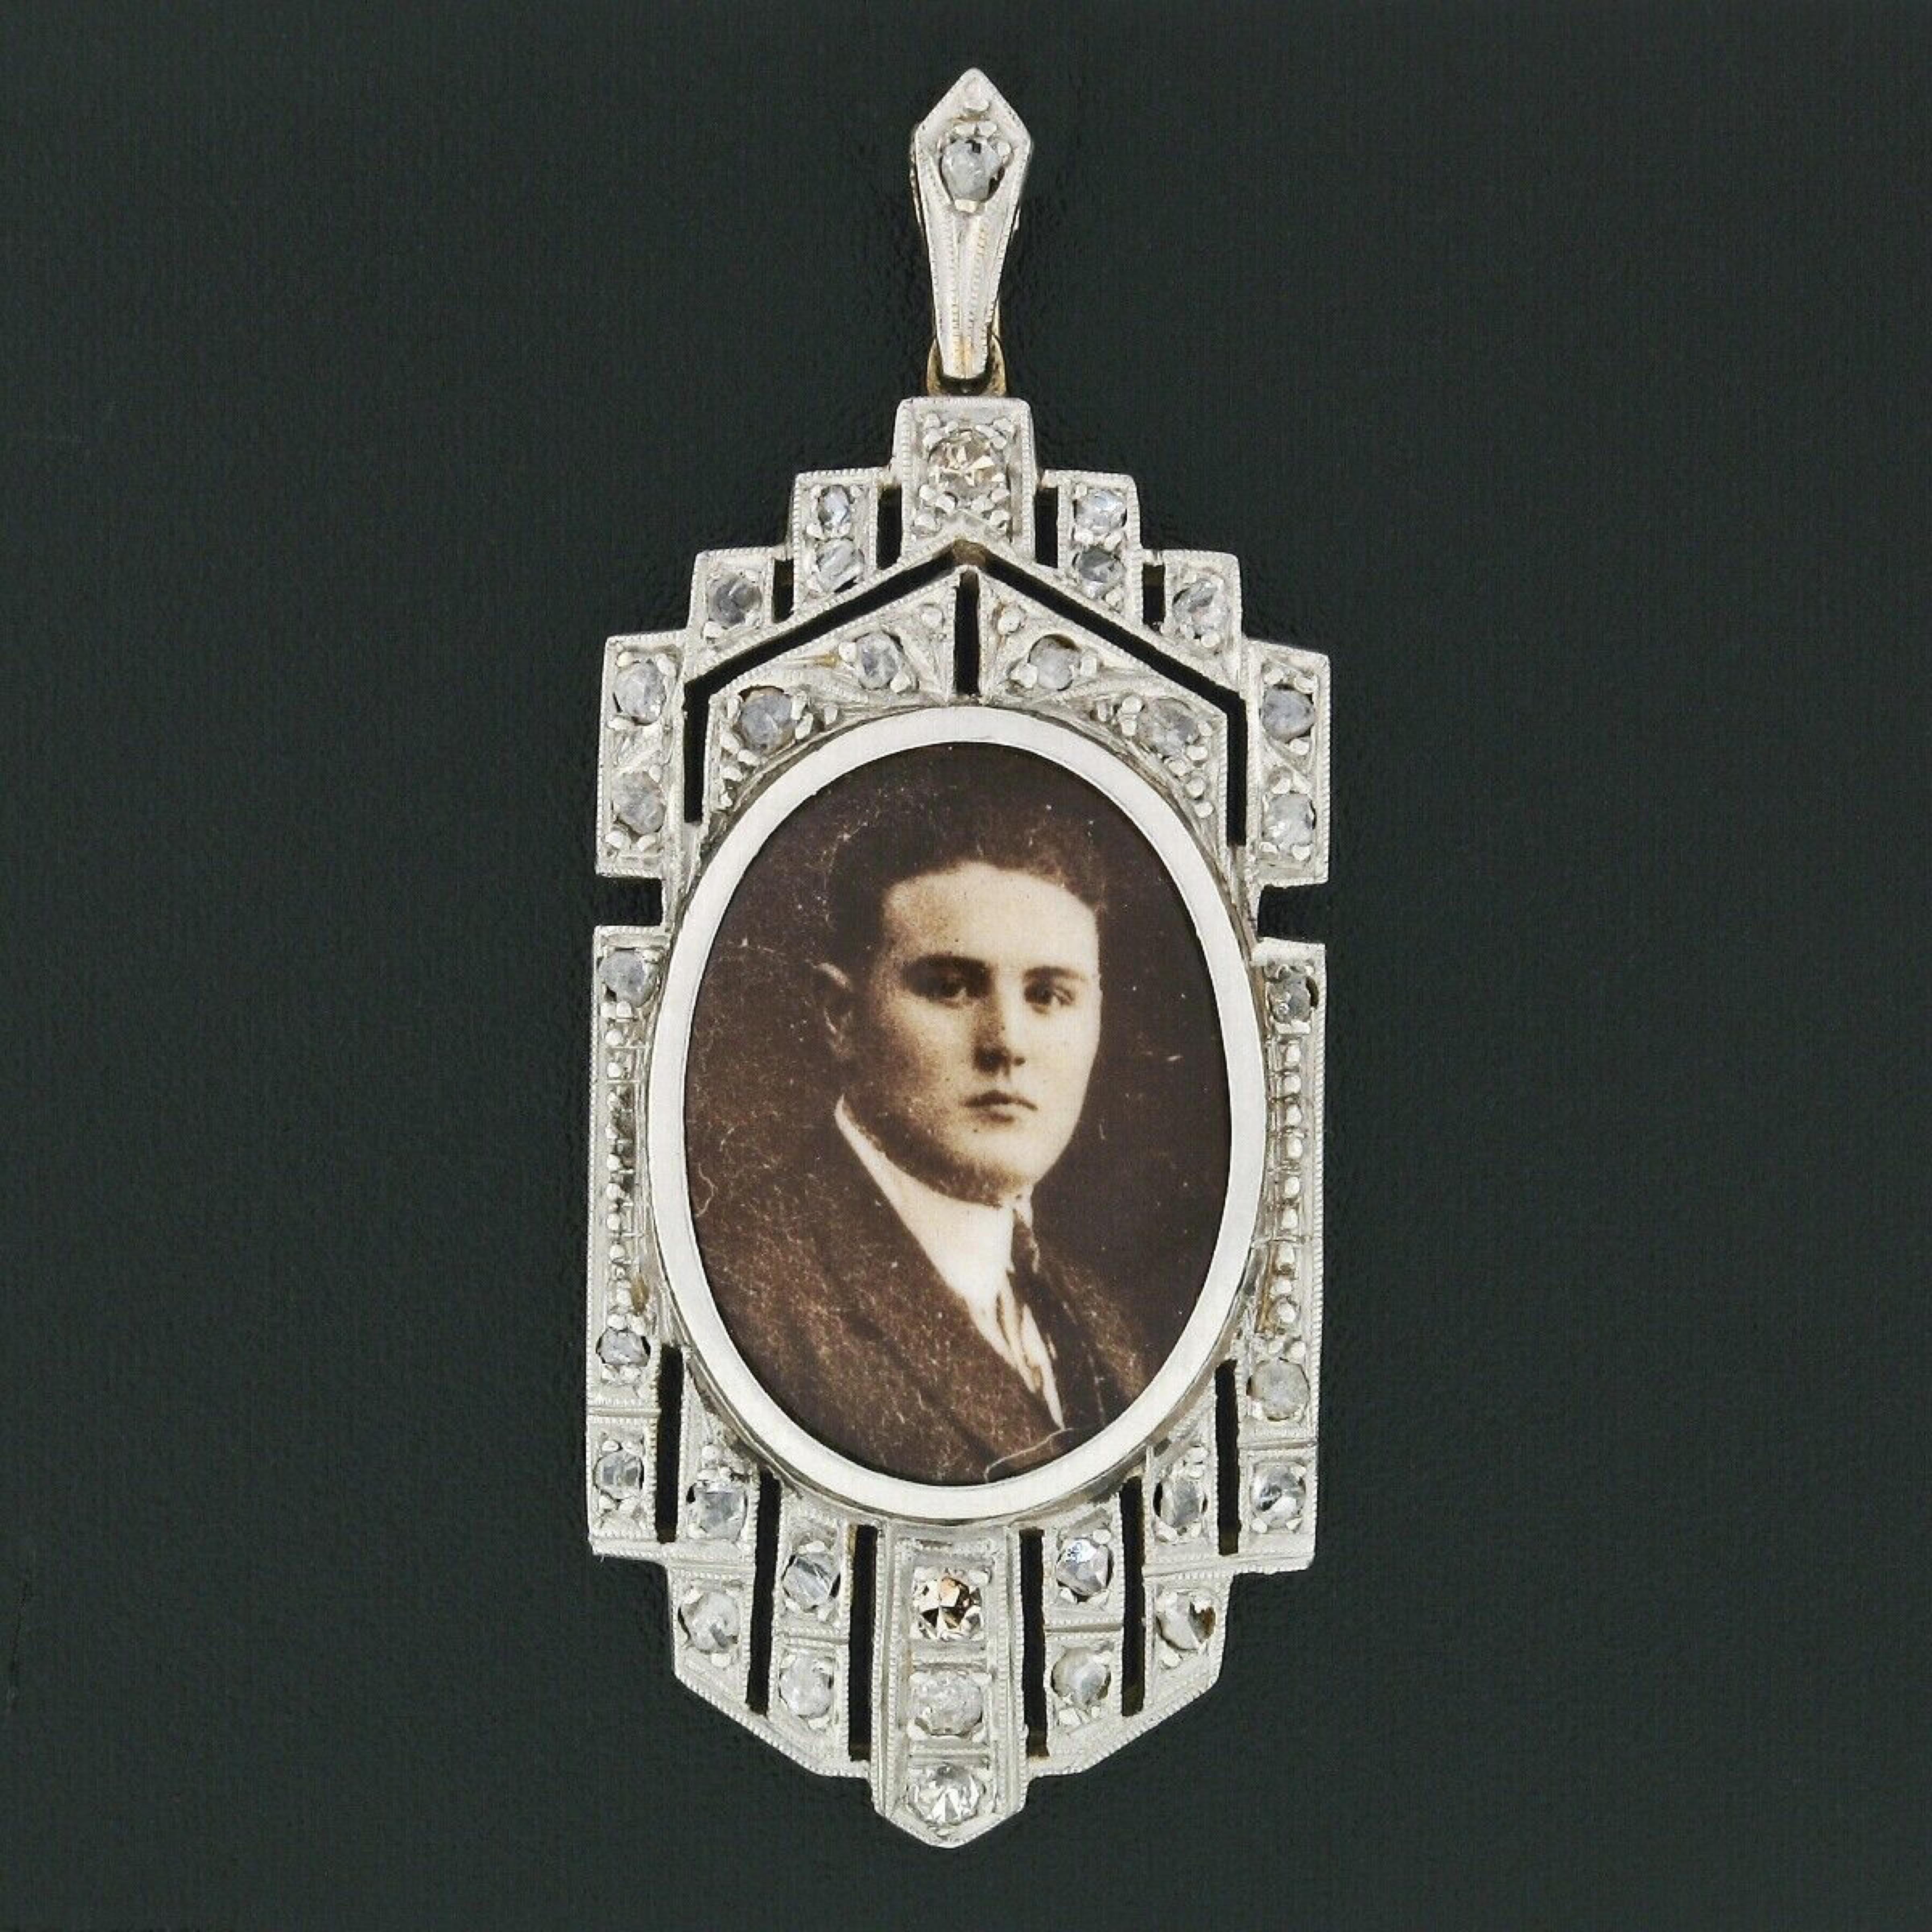 This very unusual antique pendant is crafted in solid 18k gold and platinum, featuring an old picture at its center, bezel framed and adorned with approximately 0.33 carats of rose cut diamonds throughout. The unique elongated shape is also adorned